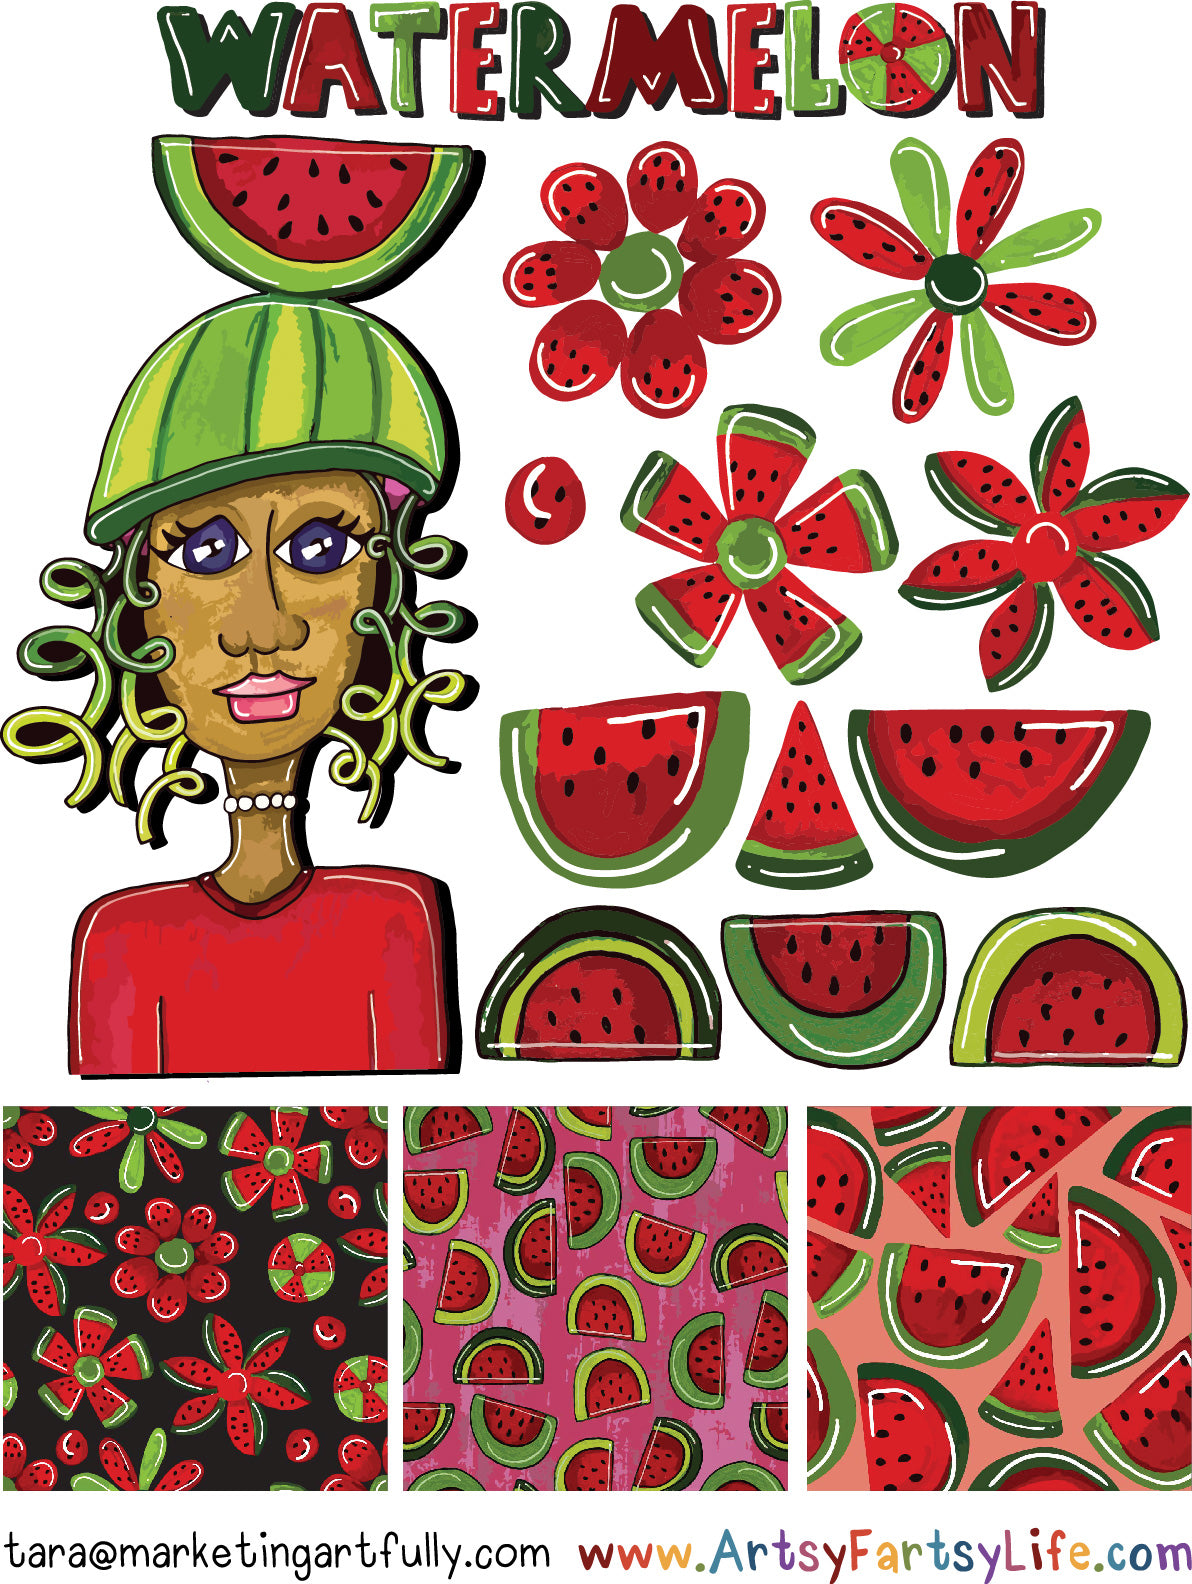 Watermelon Woman Surface Design For Shipping Supplies